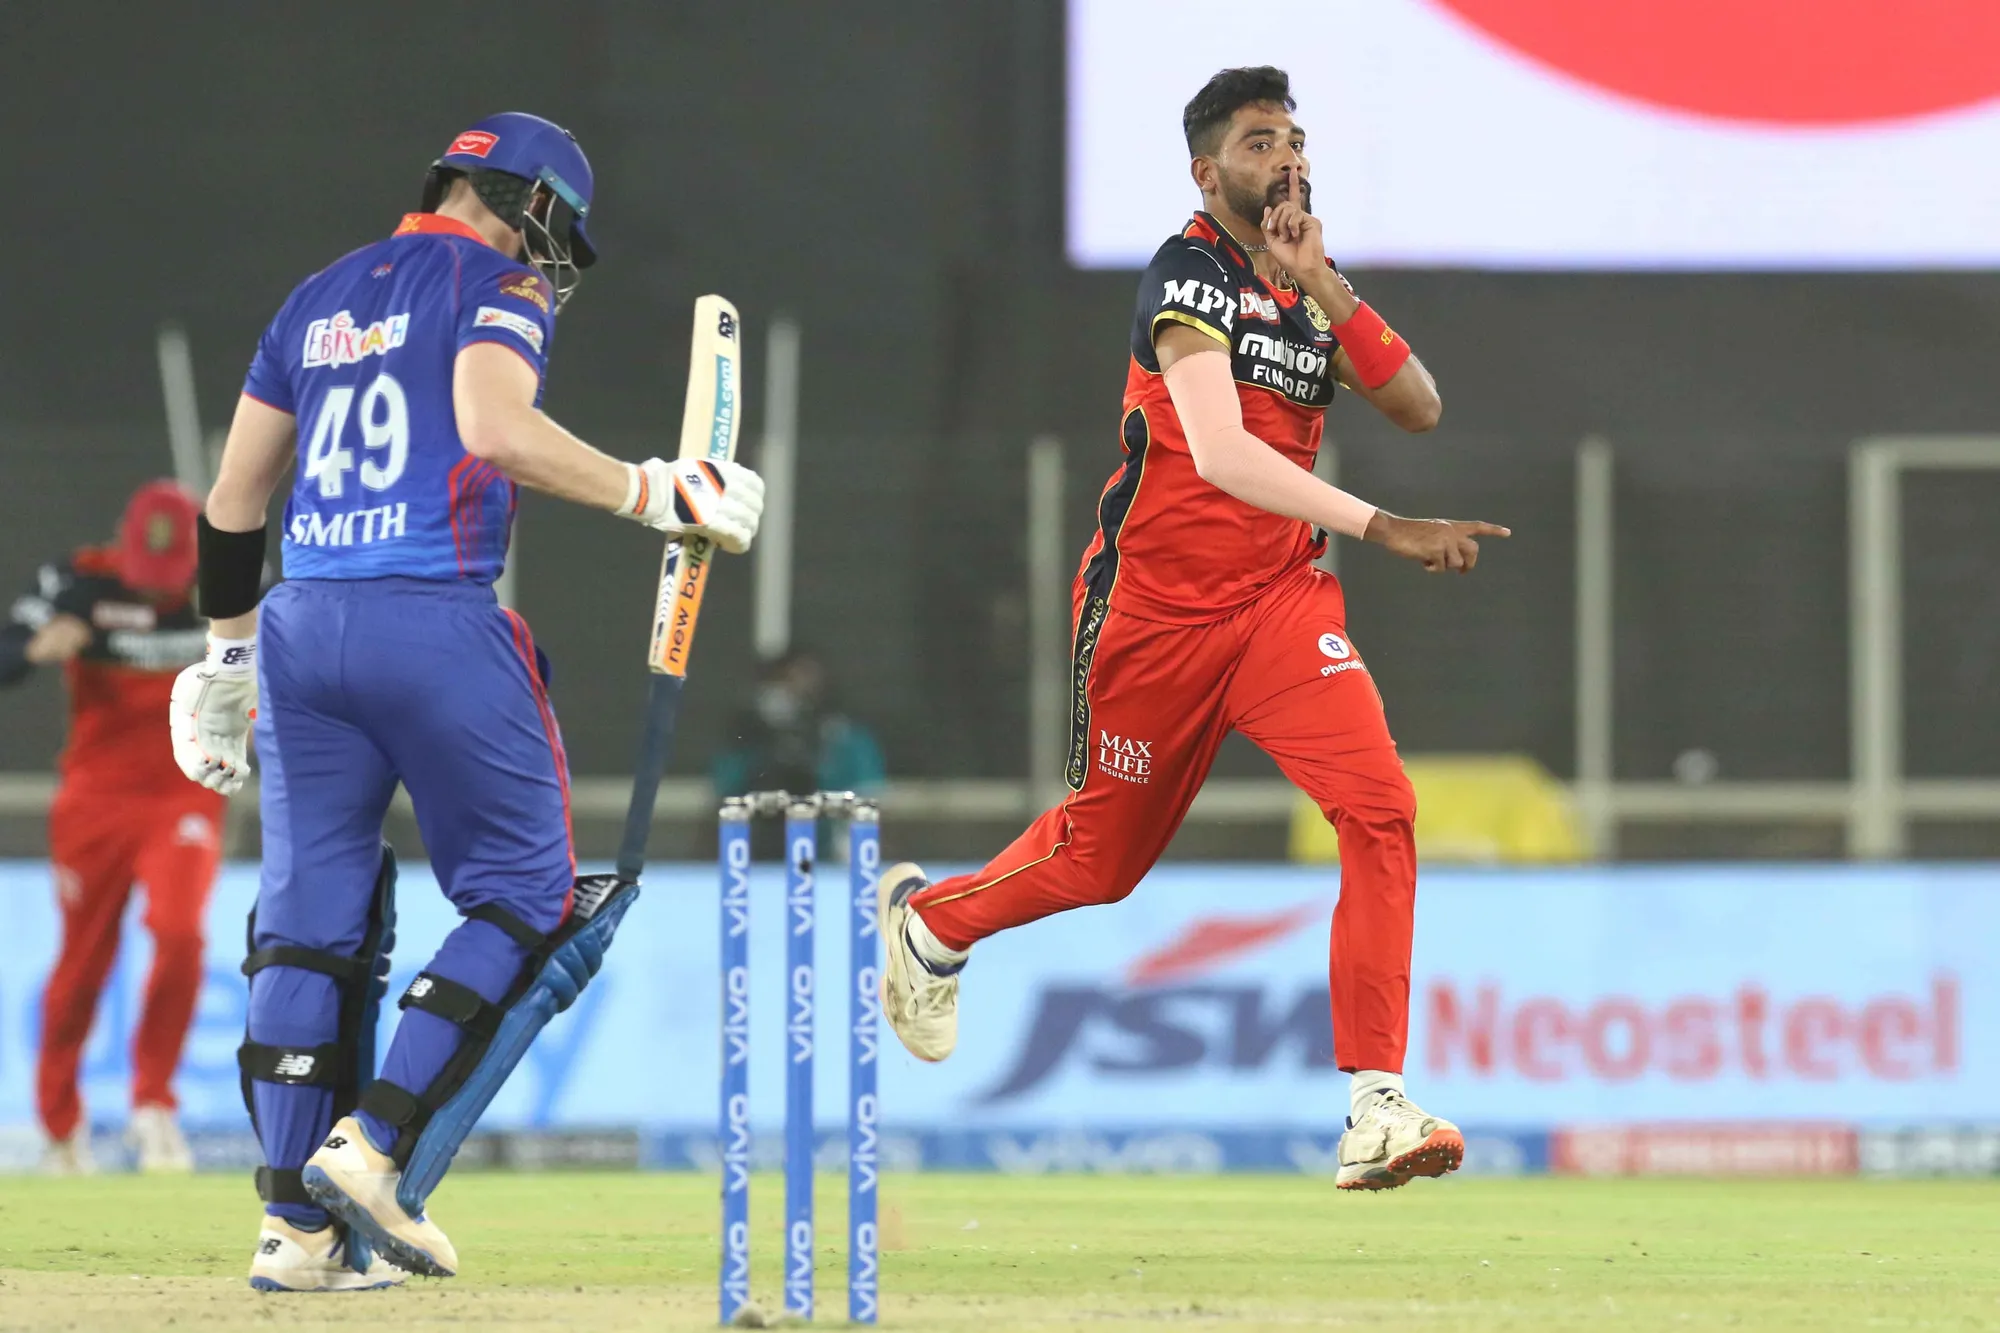 Honing the arduous powerplay skills - the Mohammed Siraj way